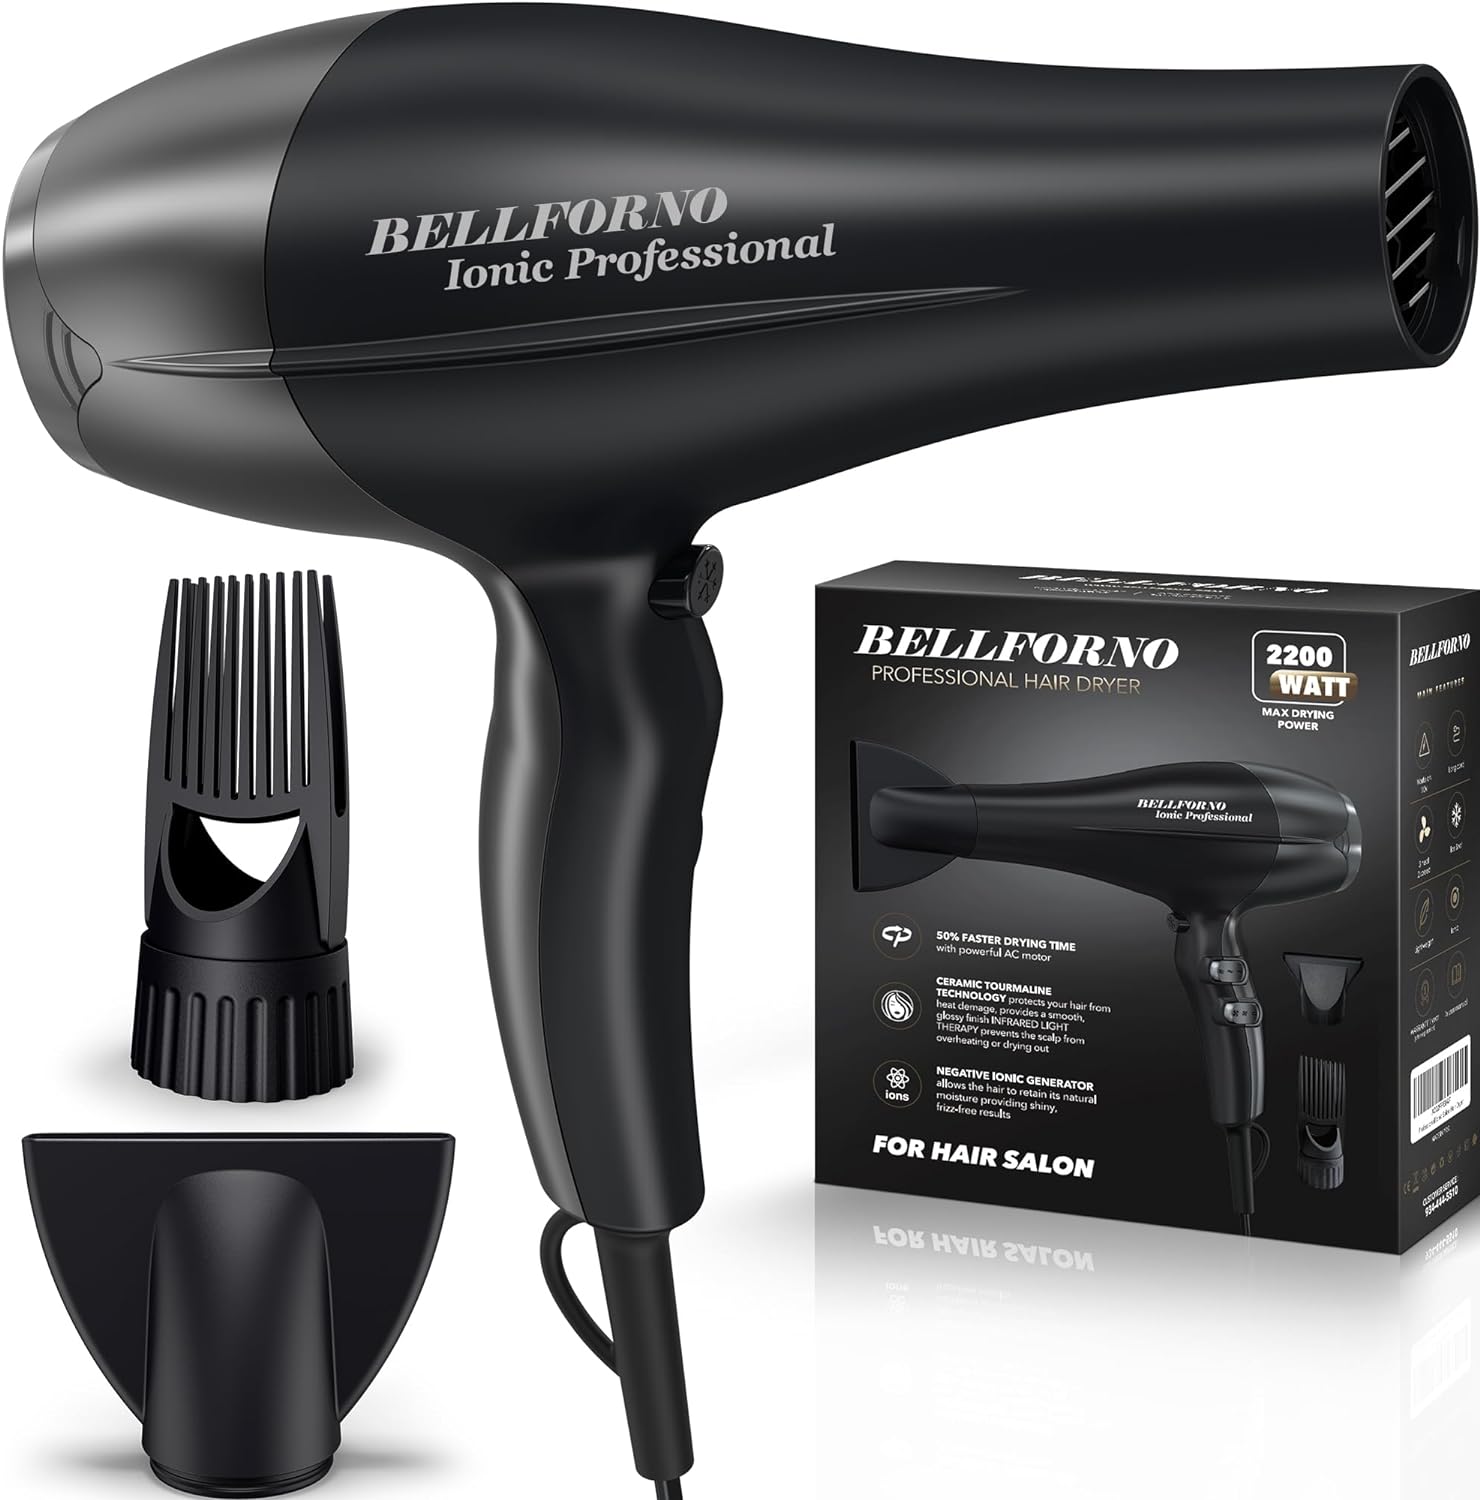 I have fine thin hair which air dries within an hour, but i prefer blow drying it than air drying. just to get that straight, blow out look.This hair dryer is a pretty decent size, definitely wouldnt take this when traveling just because its not the ideal travel size. but its perfectfor at home use! it has an amazing grip,which most hair dryers dont have. i definitely recommend this for everyday use. i also love how theres different tools that comes with it,i love using the flat head, it ma